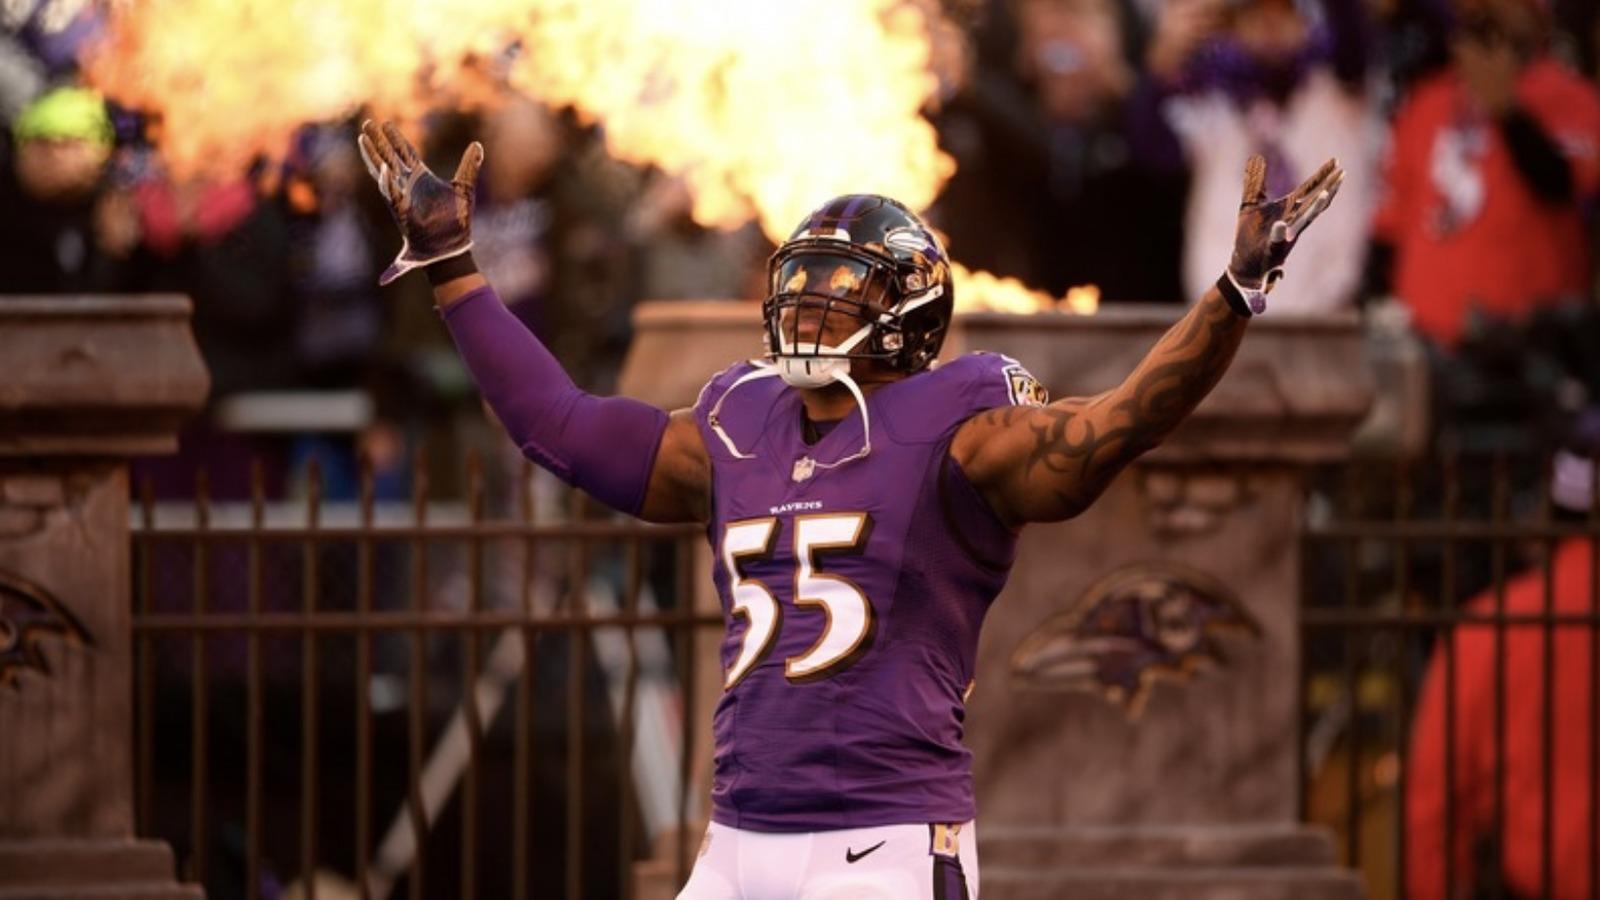 Terrell Suggs arrested after pulling a gun during heated Starbucks exchange